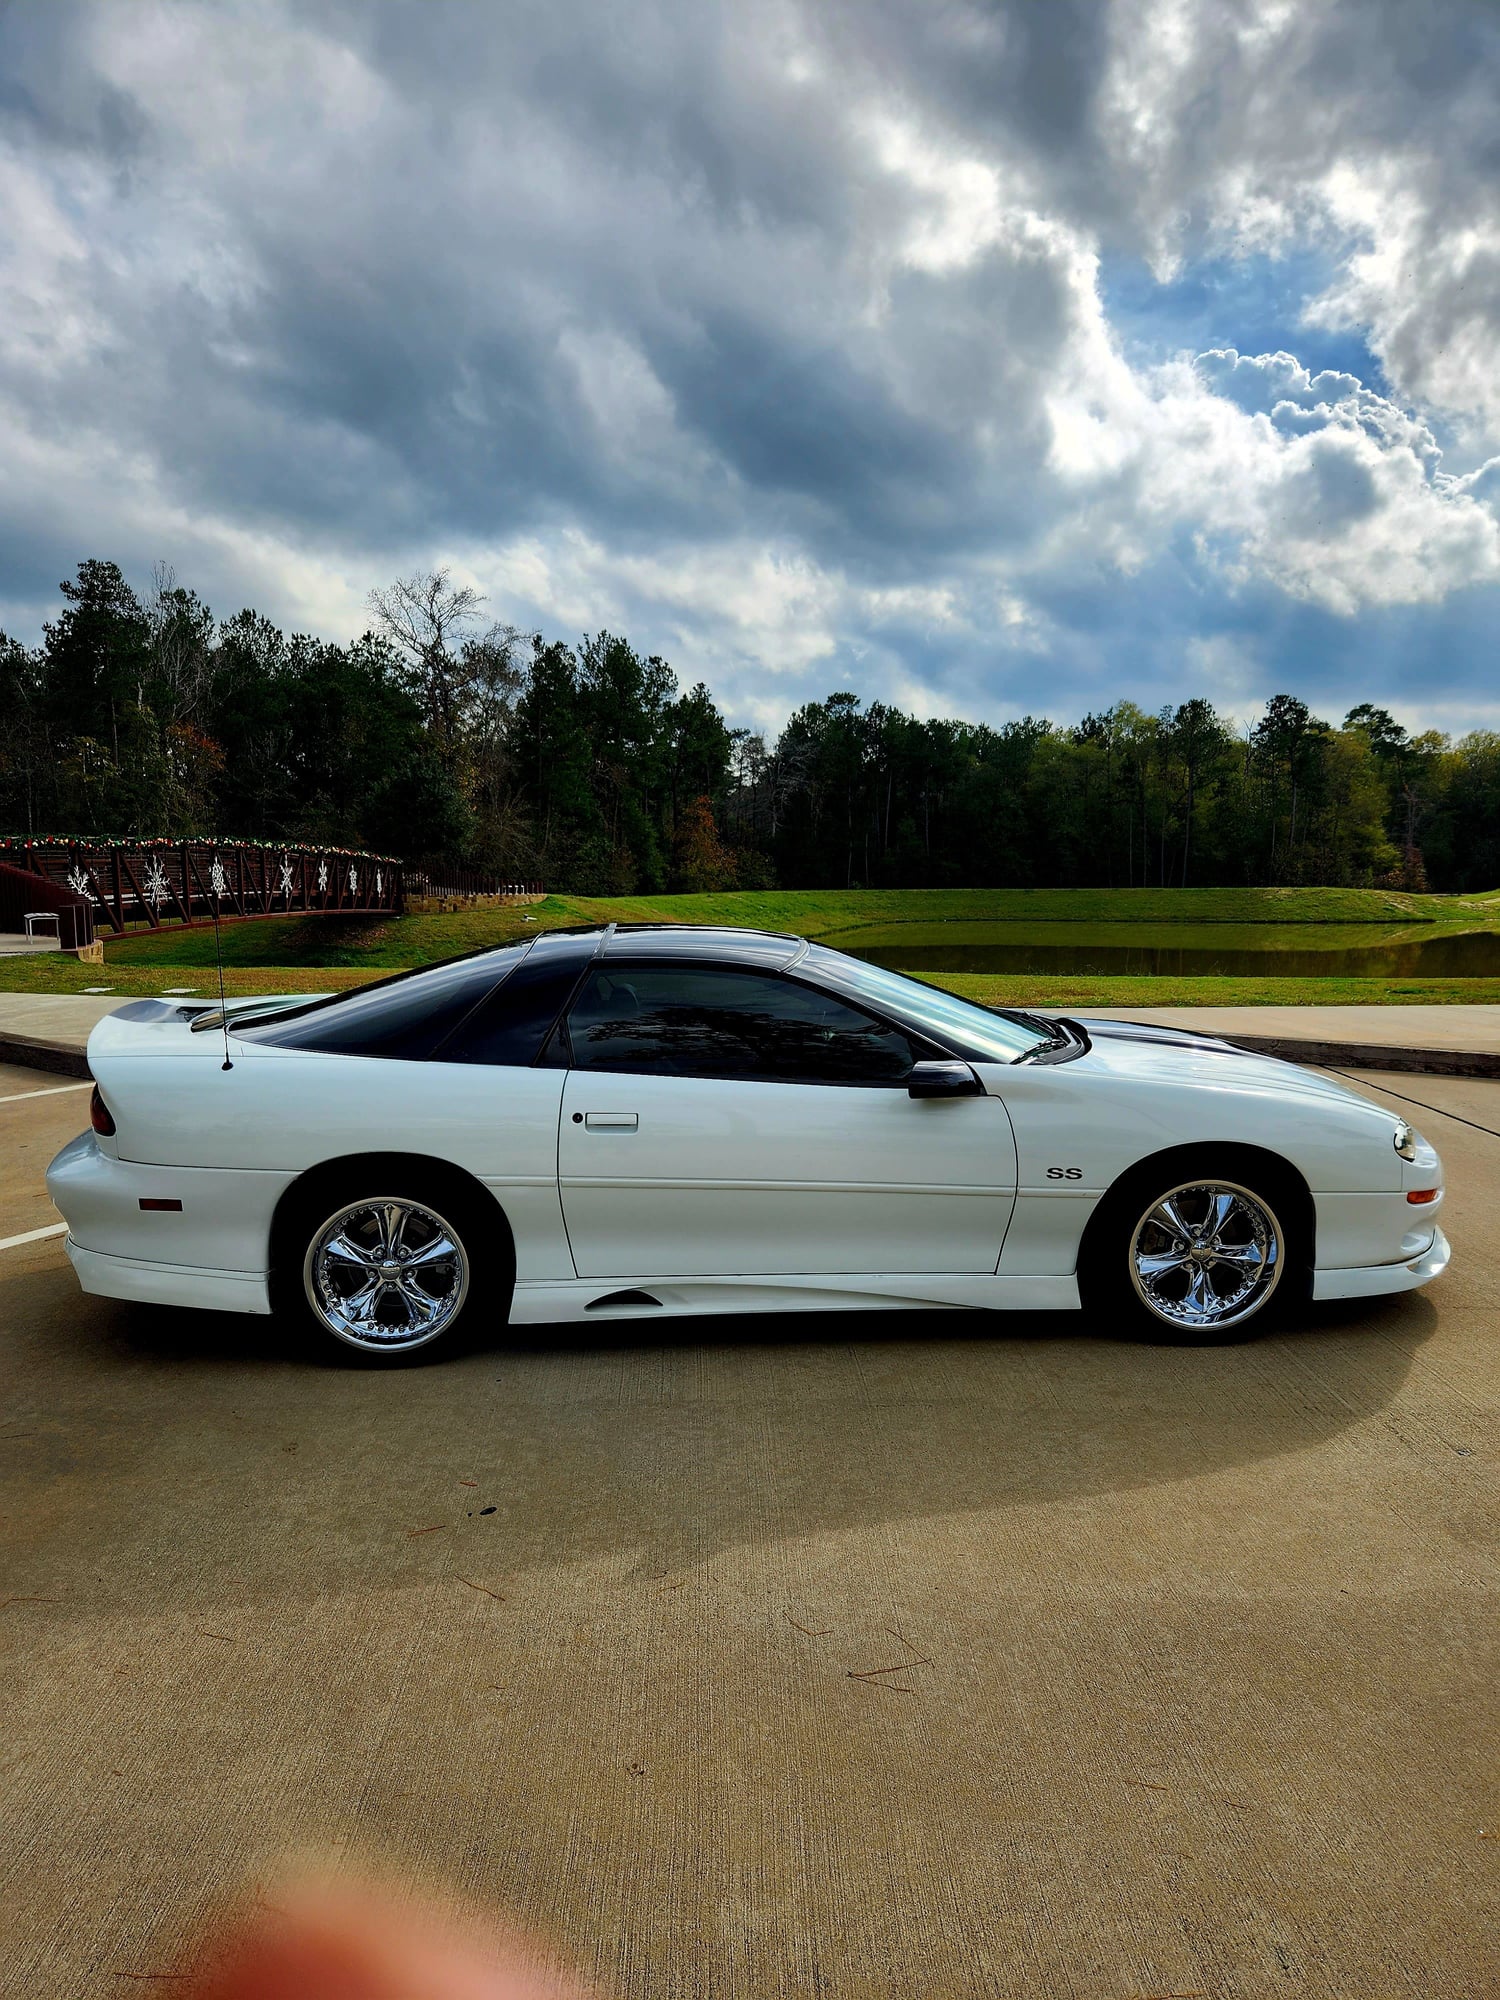 2002 Chevrolet Camaro - 2002 Camaro SS SLP - Used - VIN 2G1FP22G122100677 - 47,800 Miles - 8 cyl - 2WD - Automatic - Coupe - White - Montgomery, TX 77316, United States